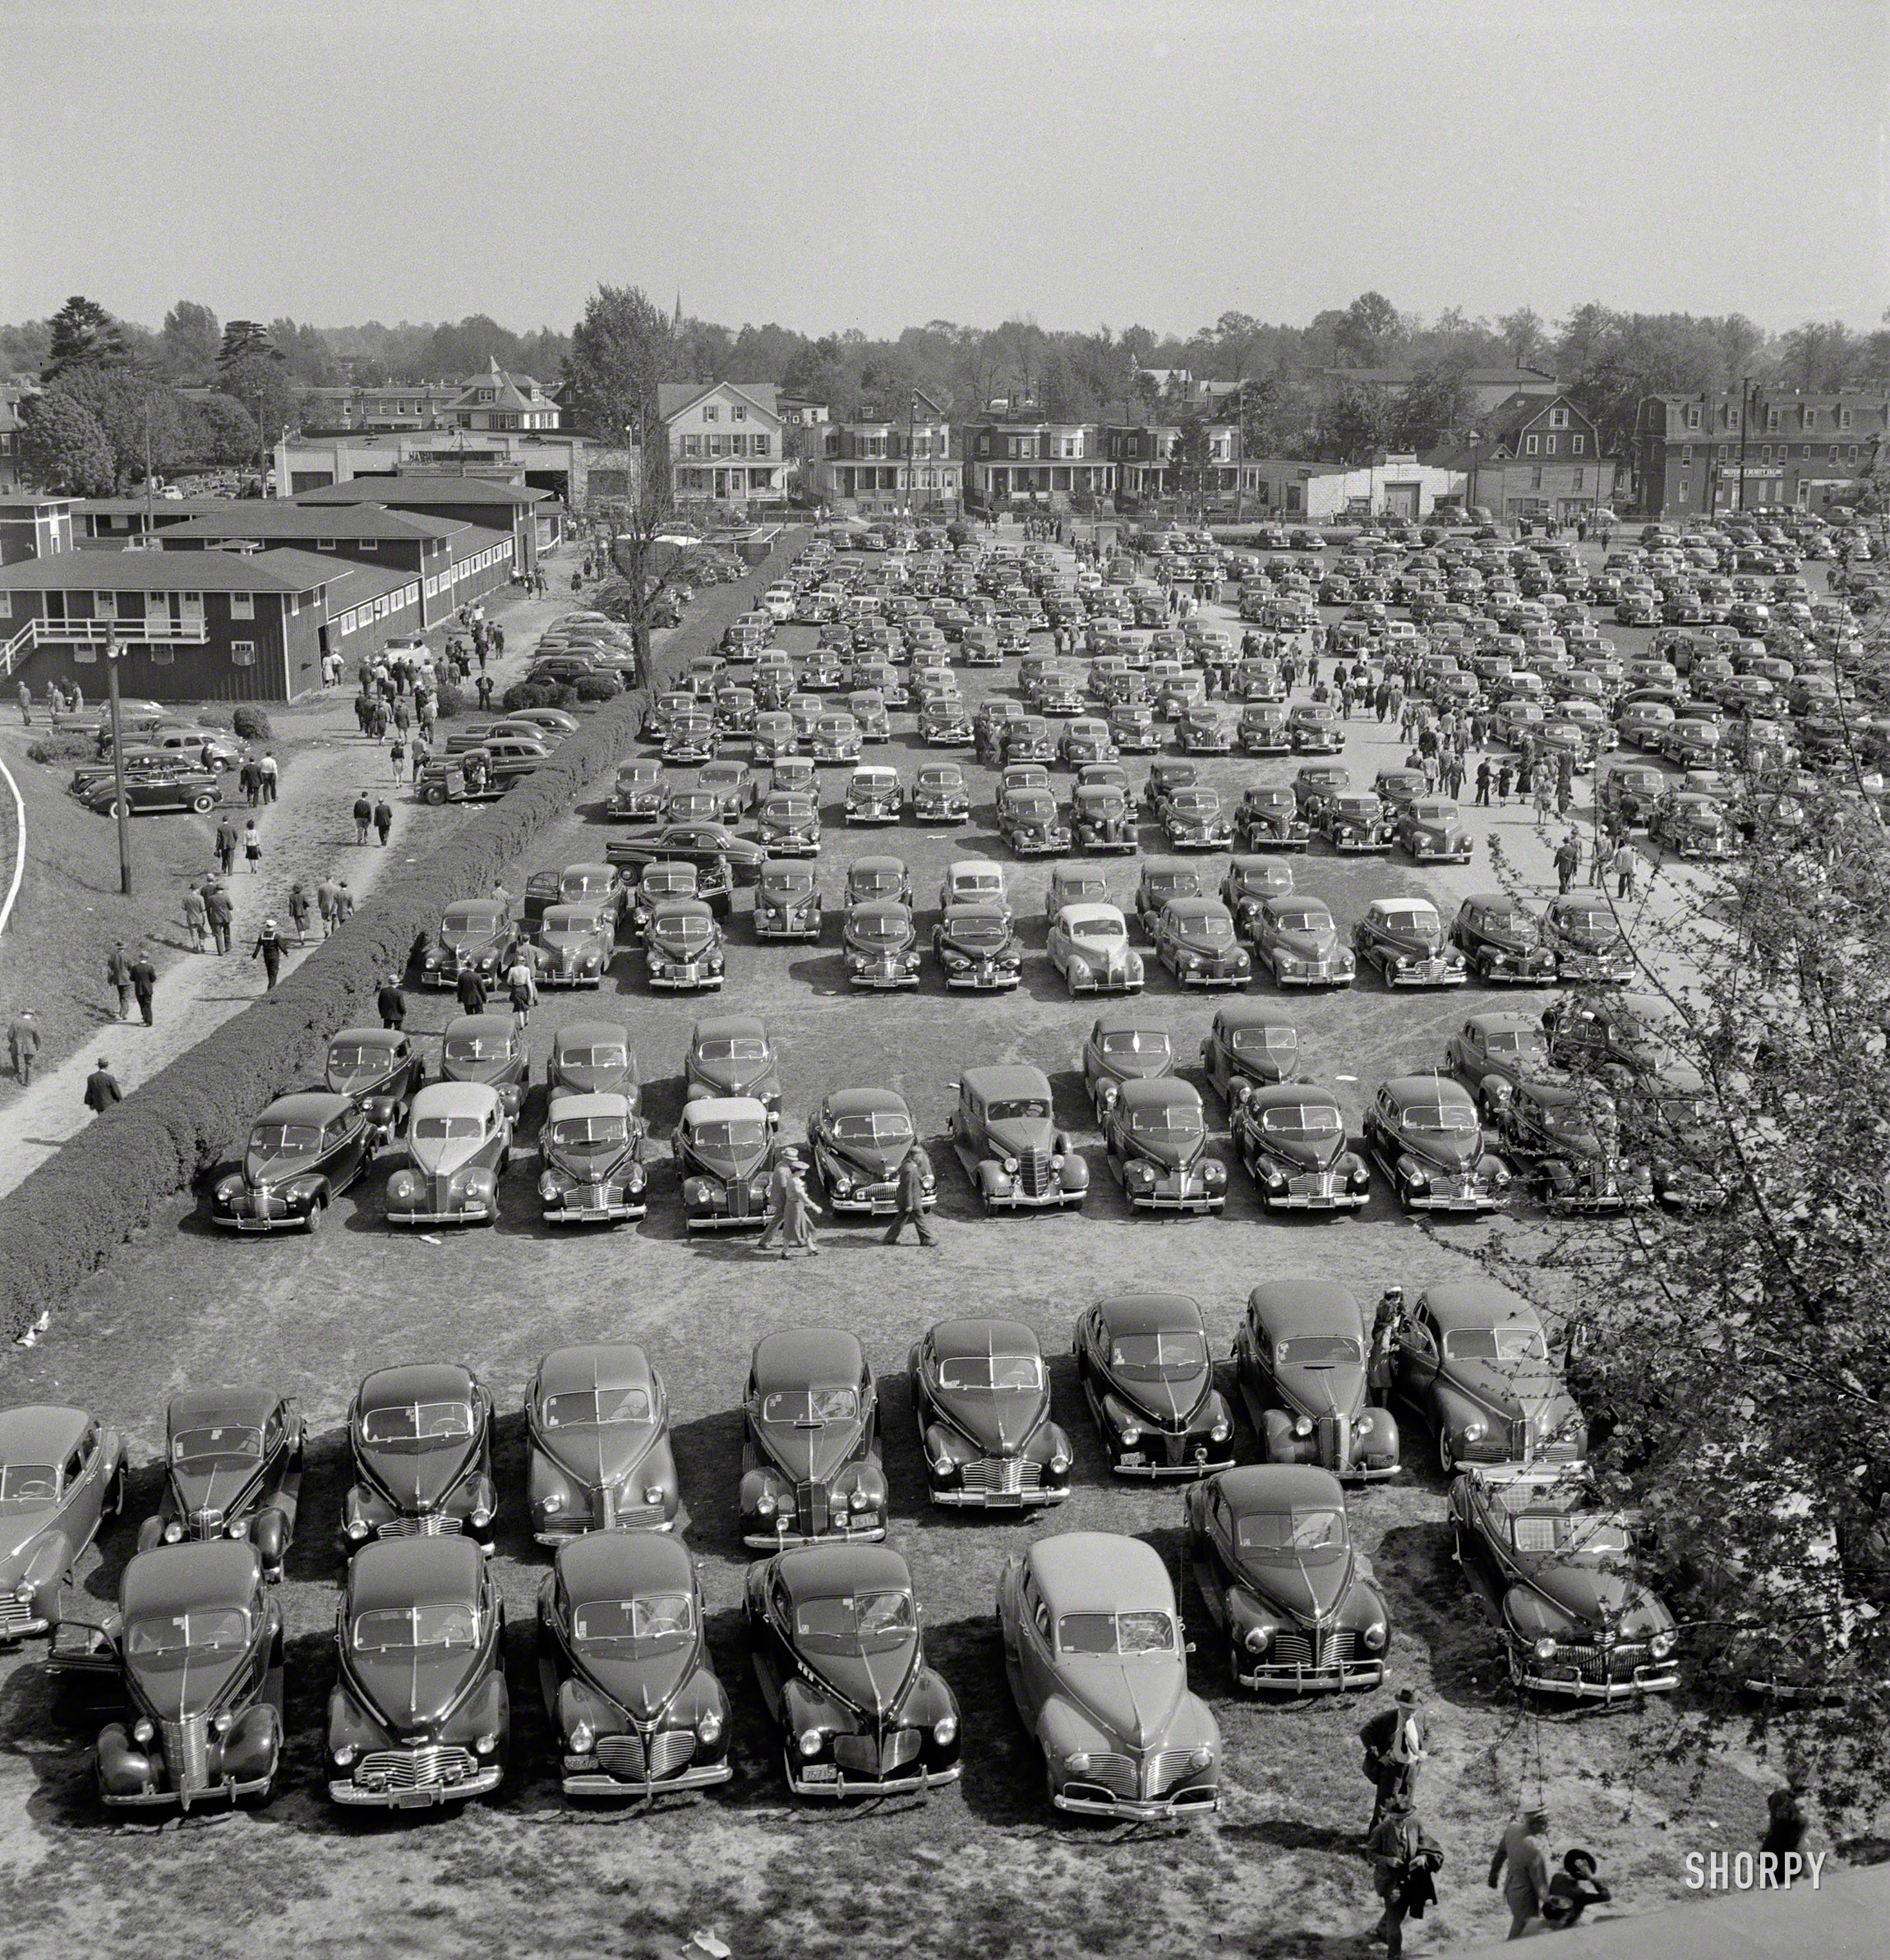 May 1943. "Pimlico racetrack near Baltimore, Maryland. Parked cars in spite of gas ration." Photo by Arthur Siegel, Office of War Information. View full size.